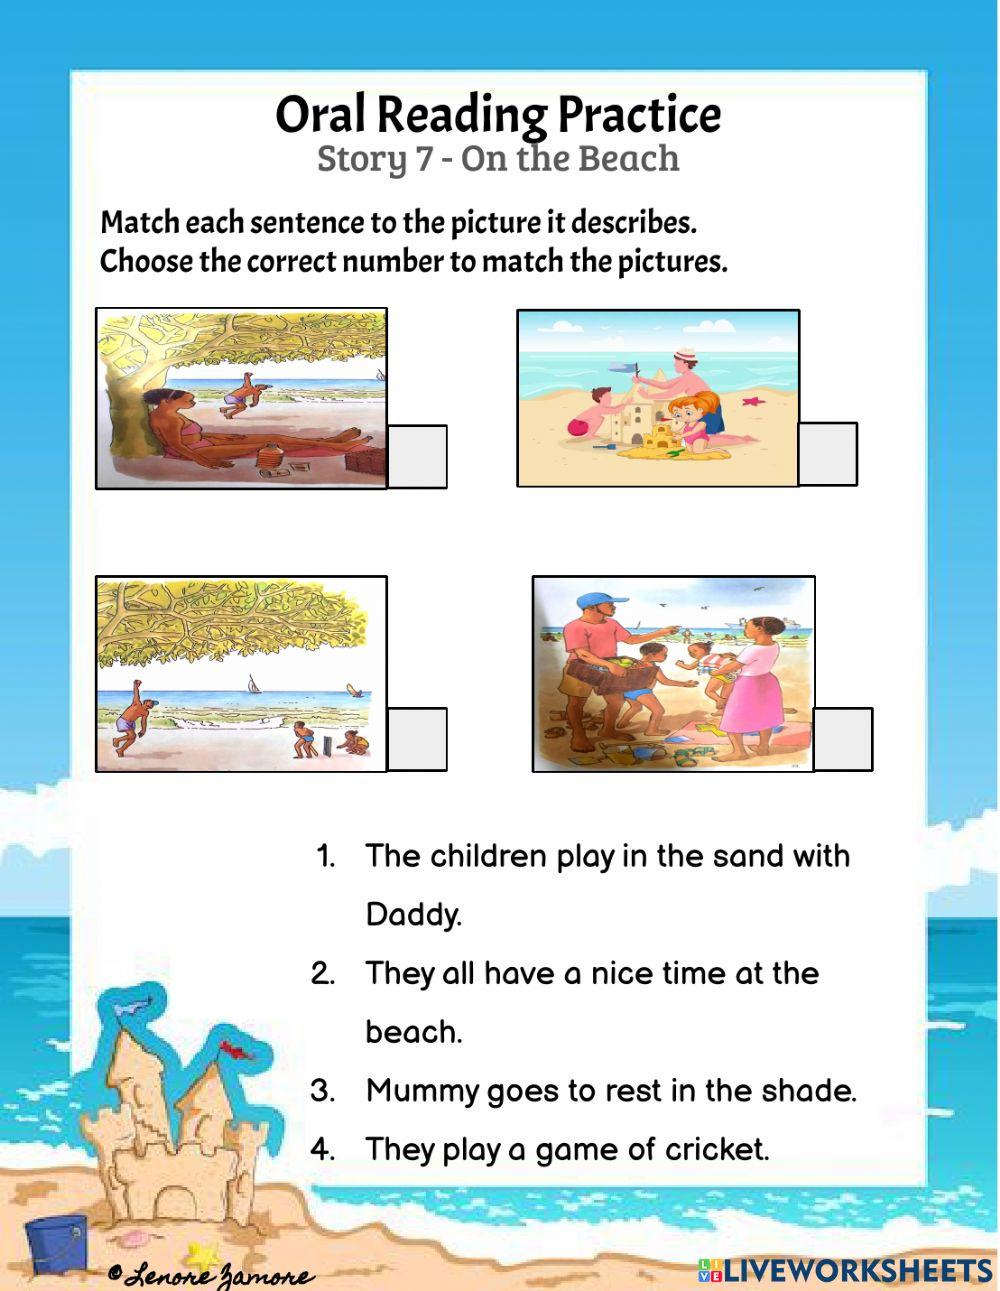 Oral Reading Practice - Story 7